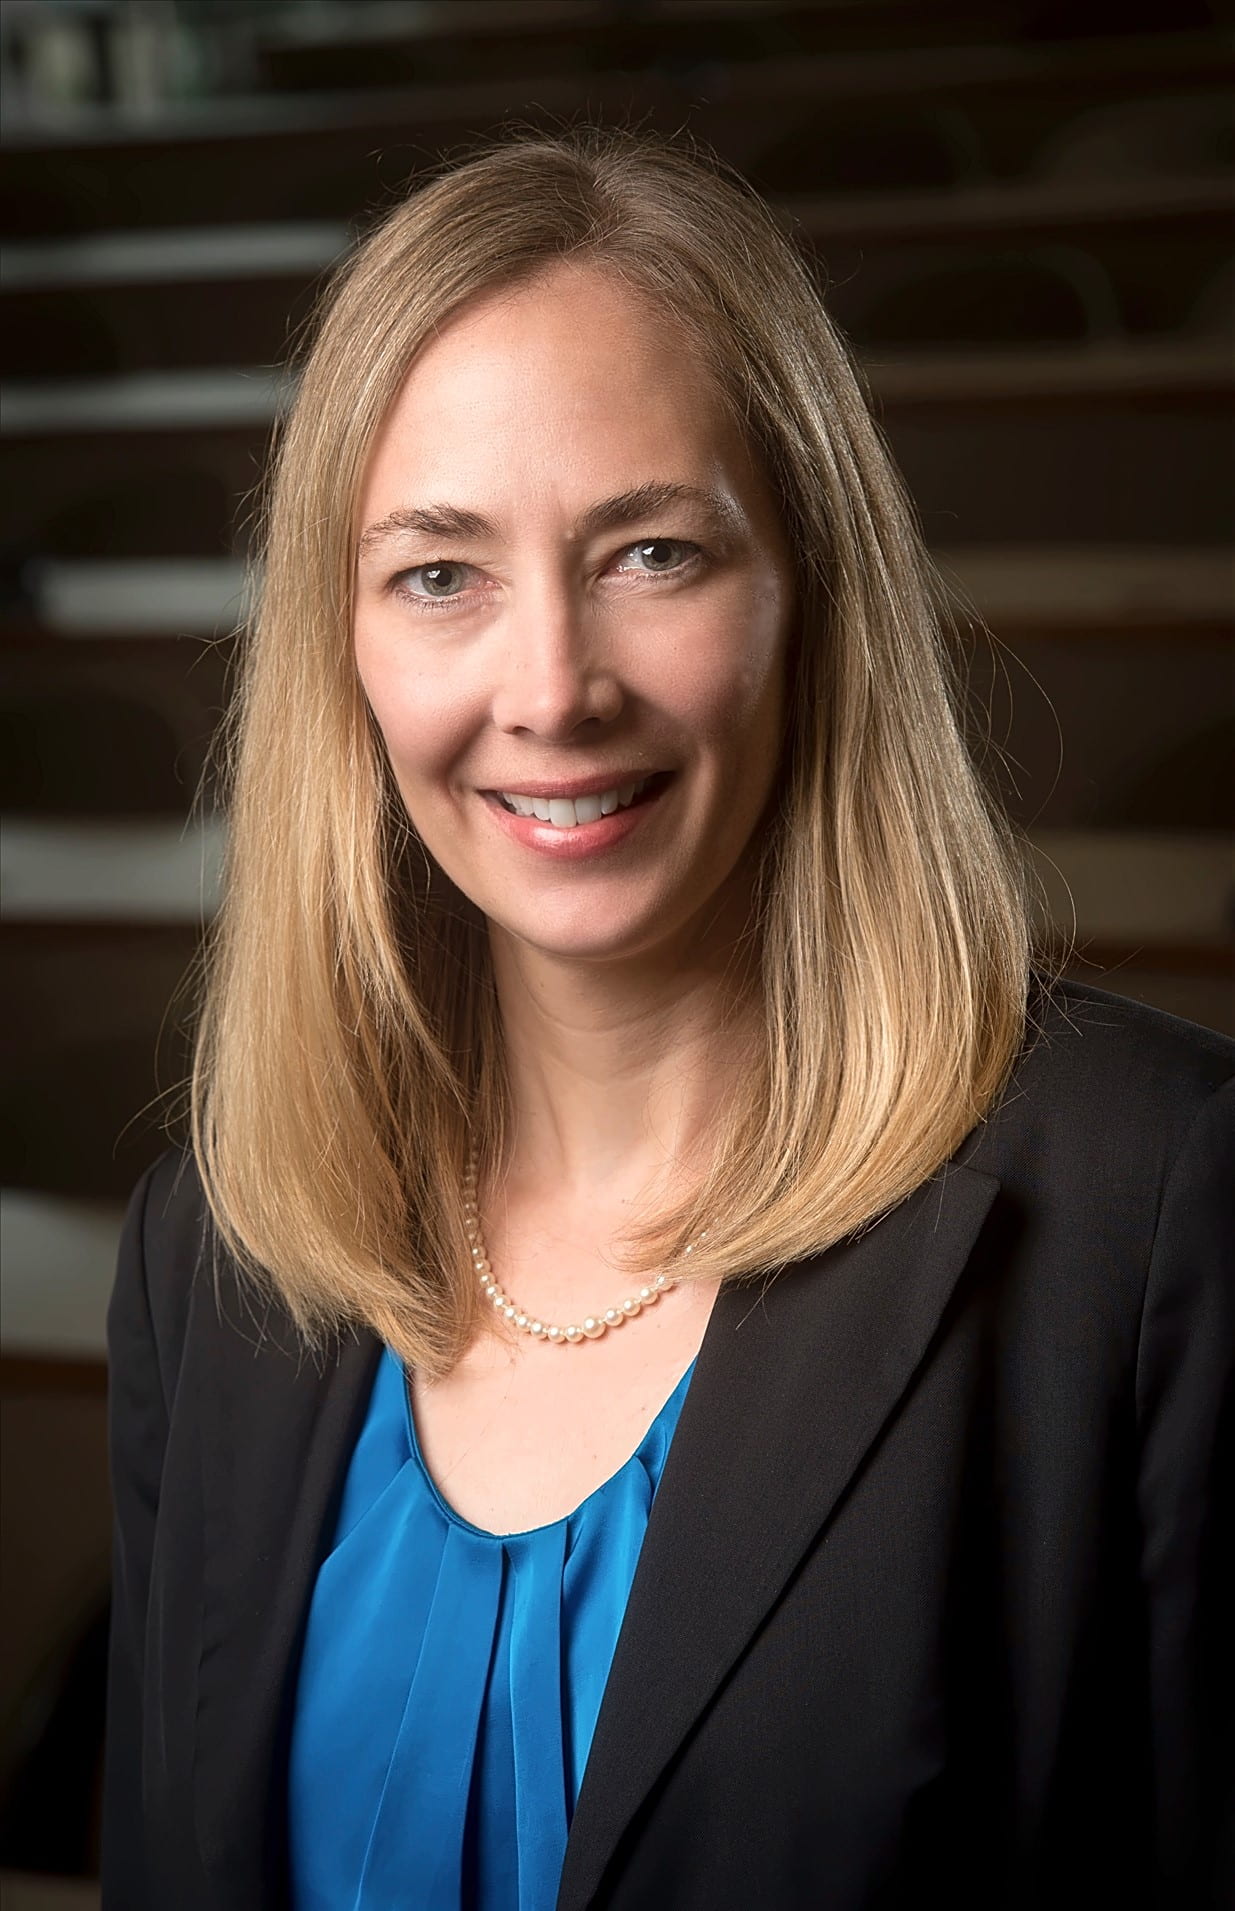 Head shot of Dr. Tina Kempin Reuter, PhD (Director, Institute for Human Rights), 2016.